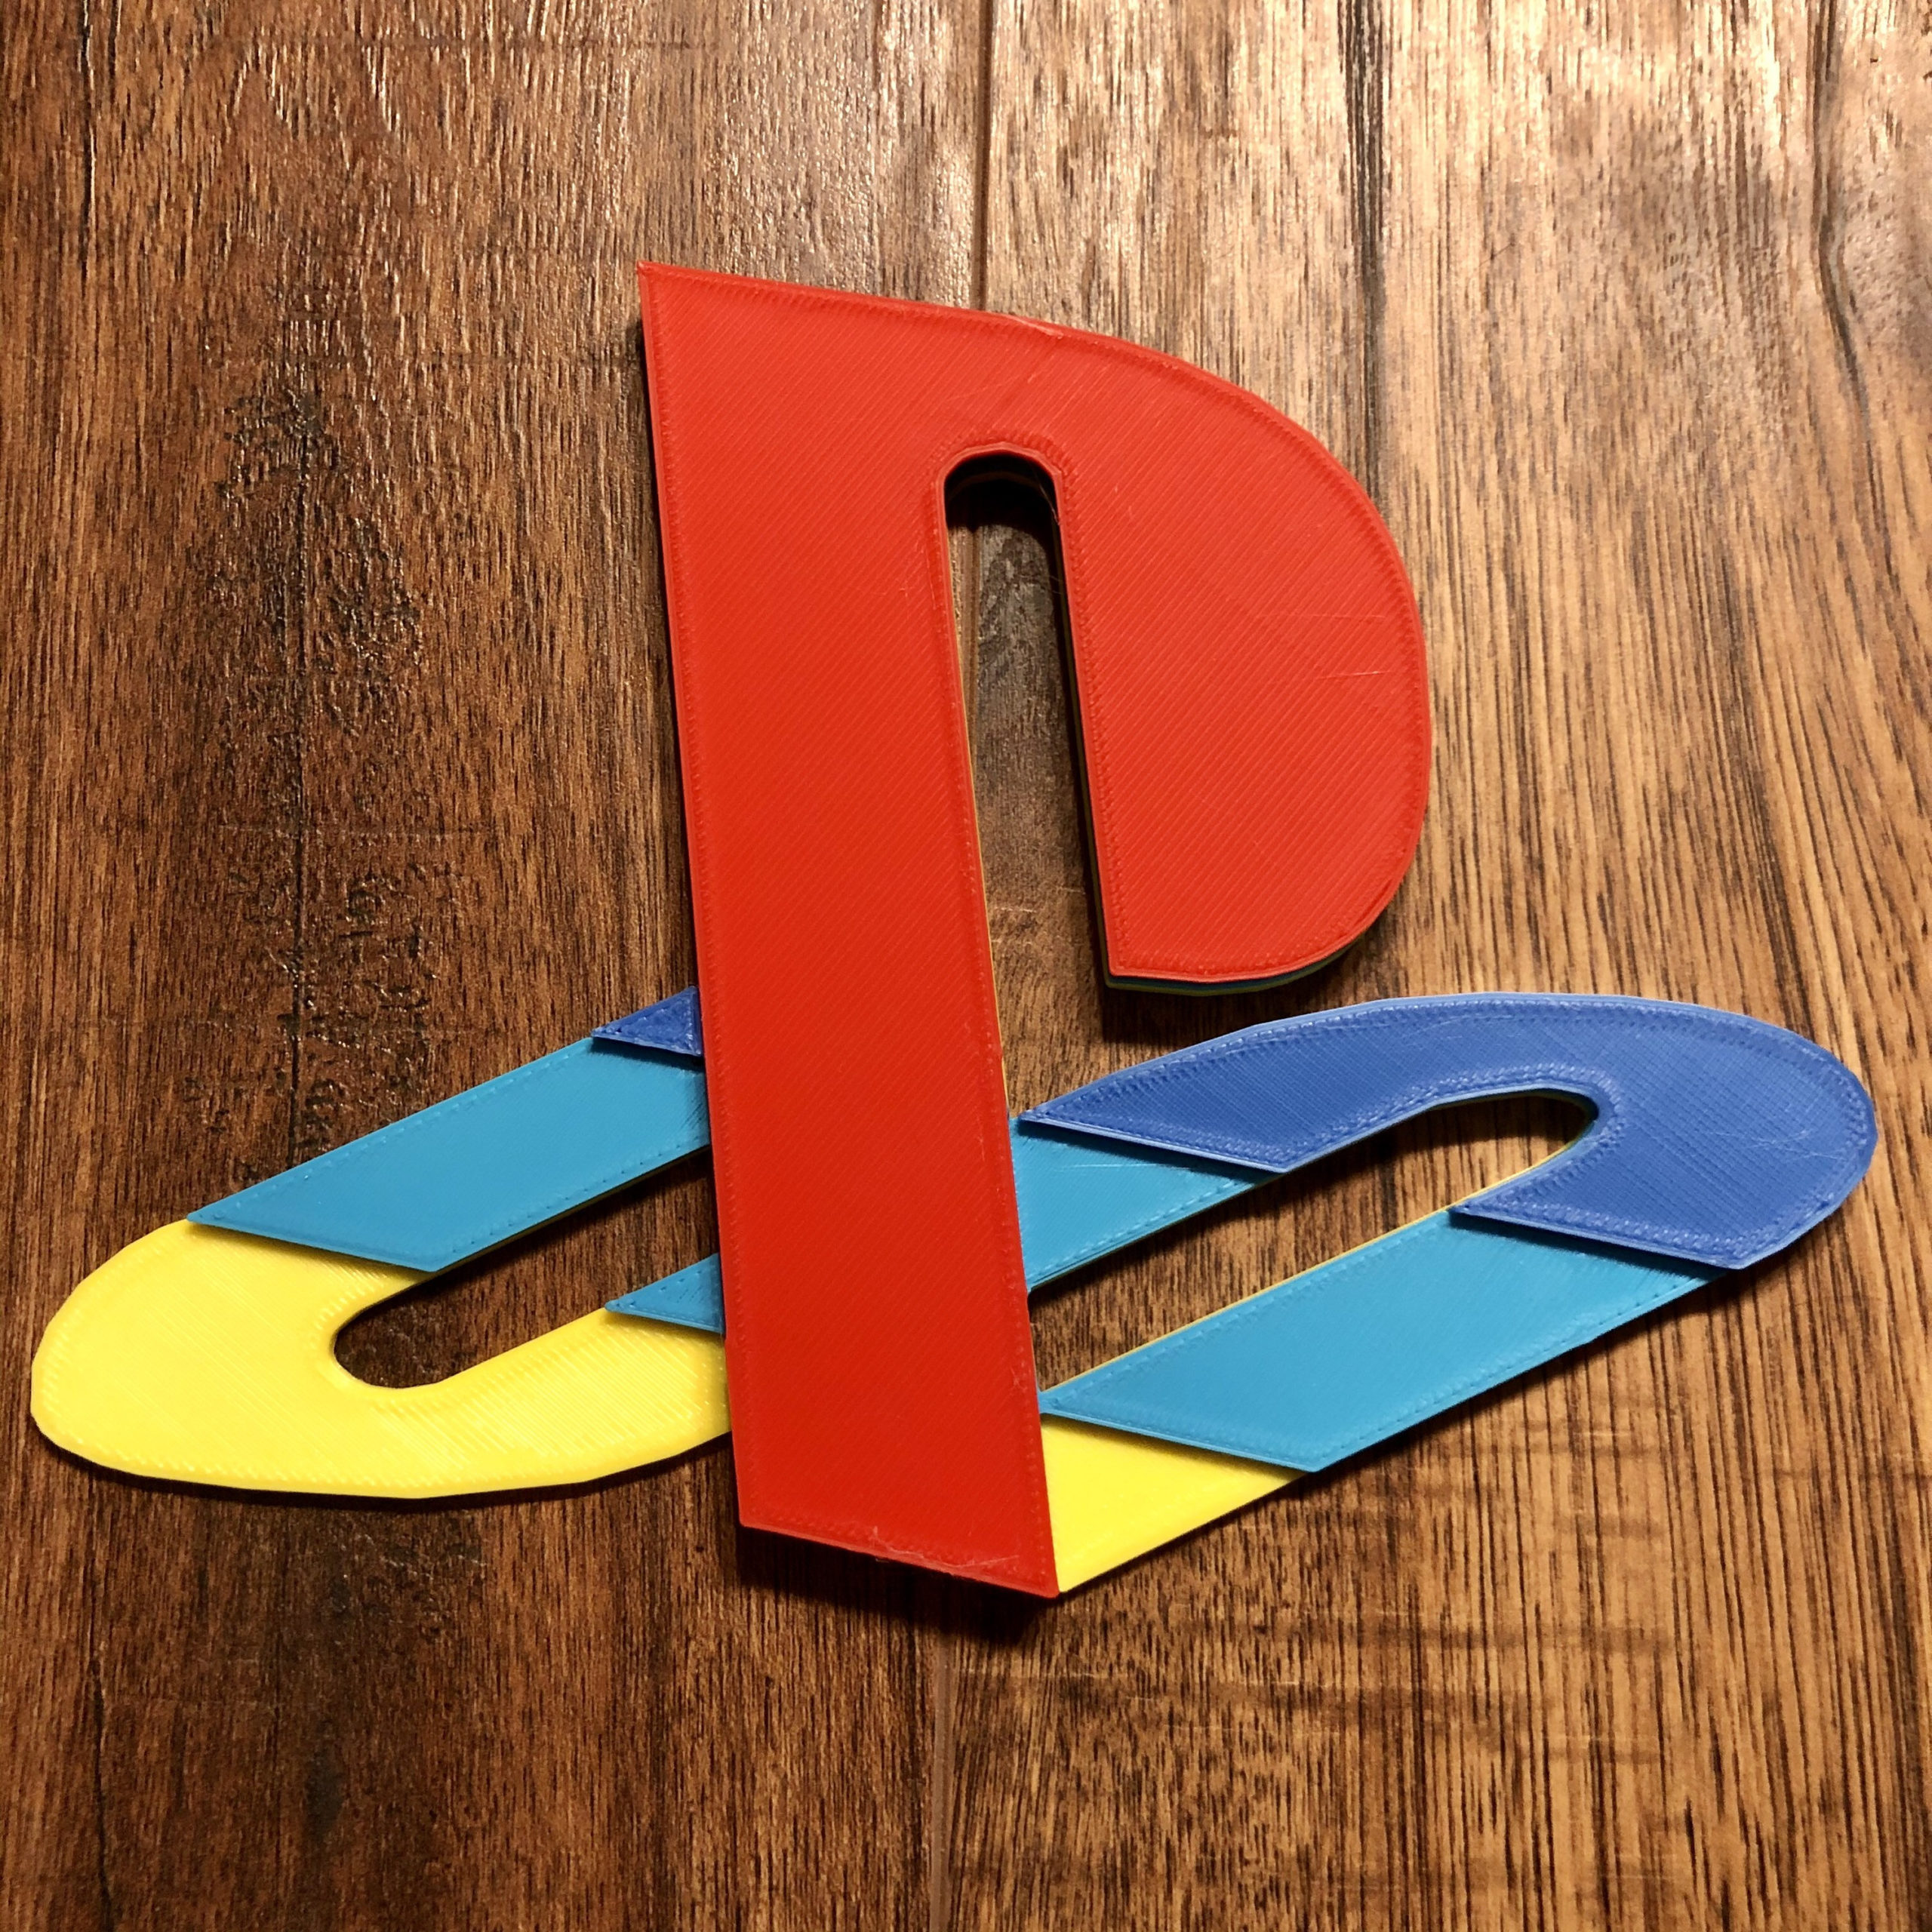 4,288 Play Station Logo Images, Stock Photos, 3D objects, & Vectors